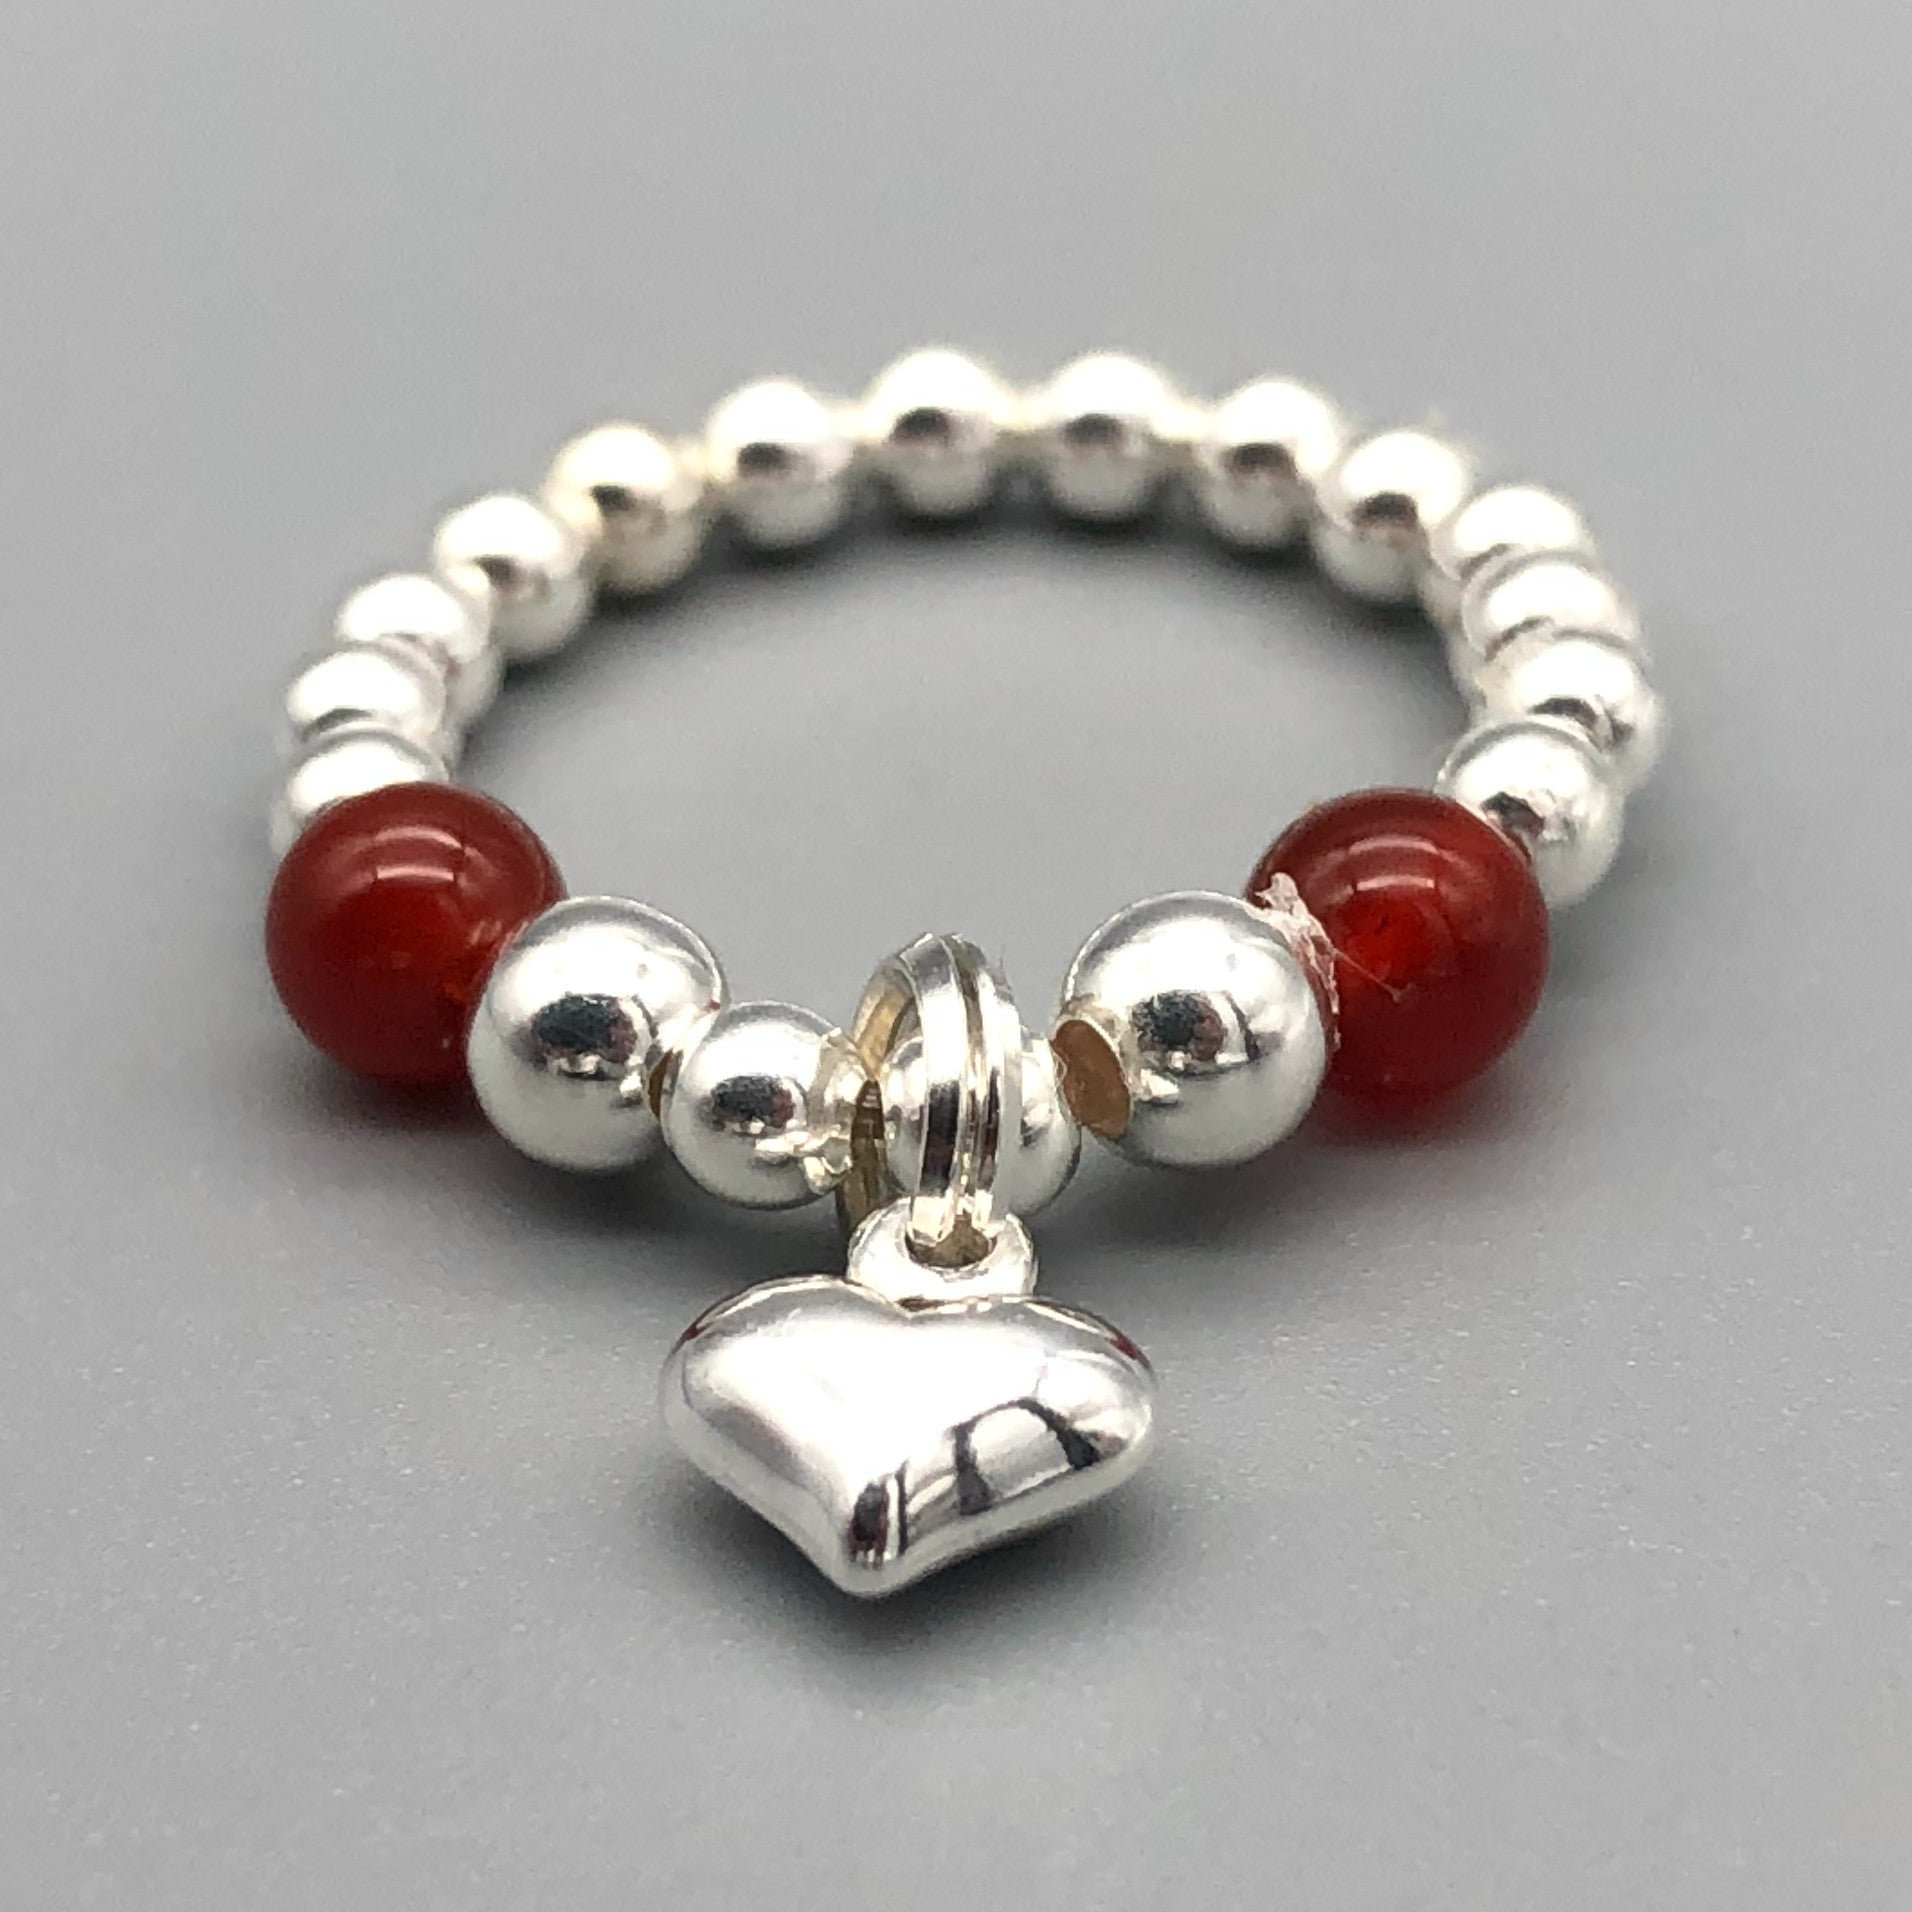 Heart charm sterling silver & carnelian bead girl's stacking charm ring by My Silver Wish